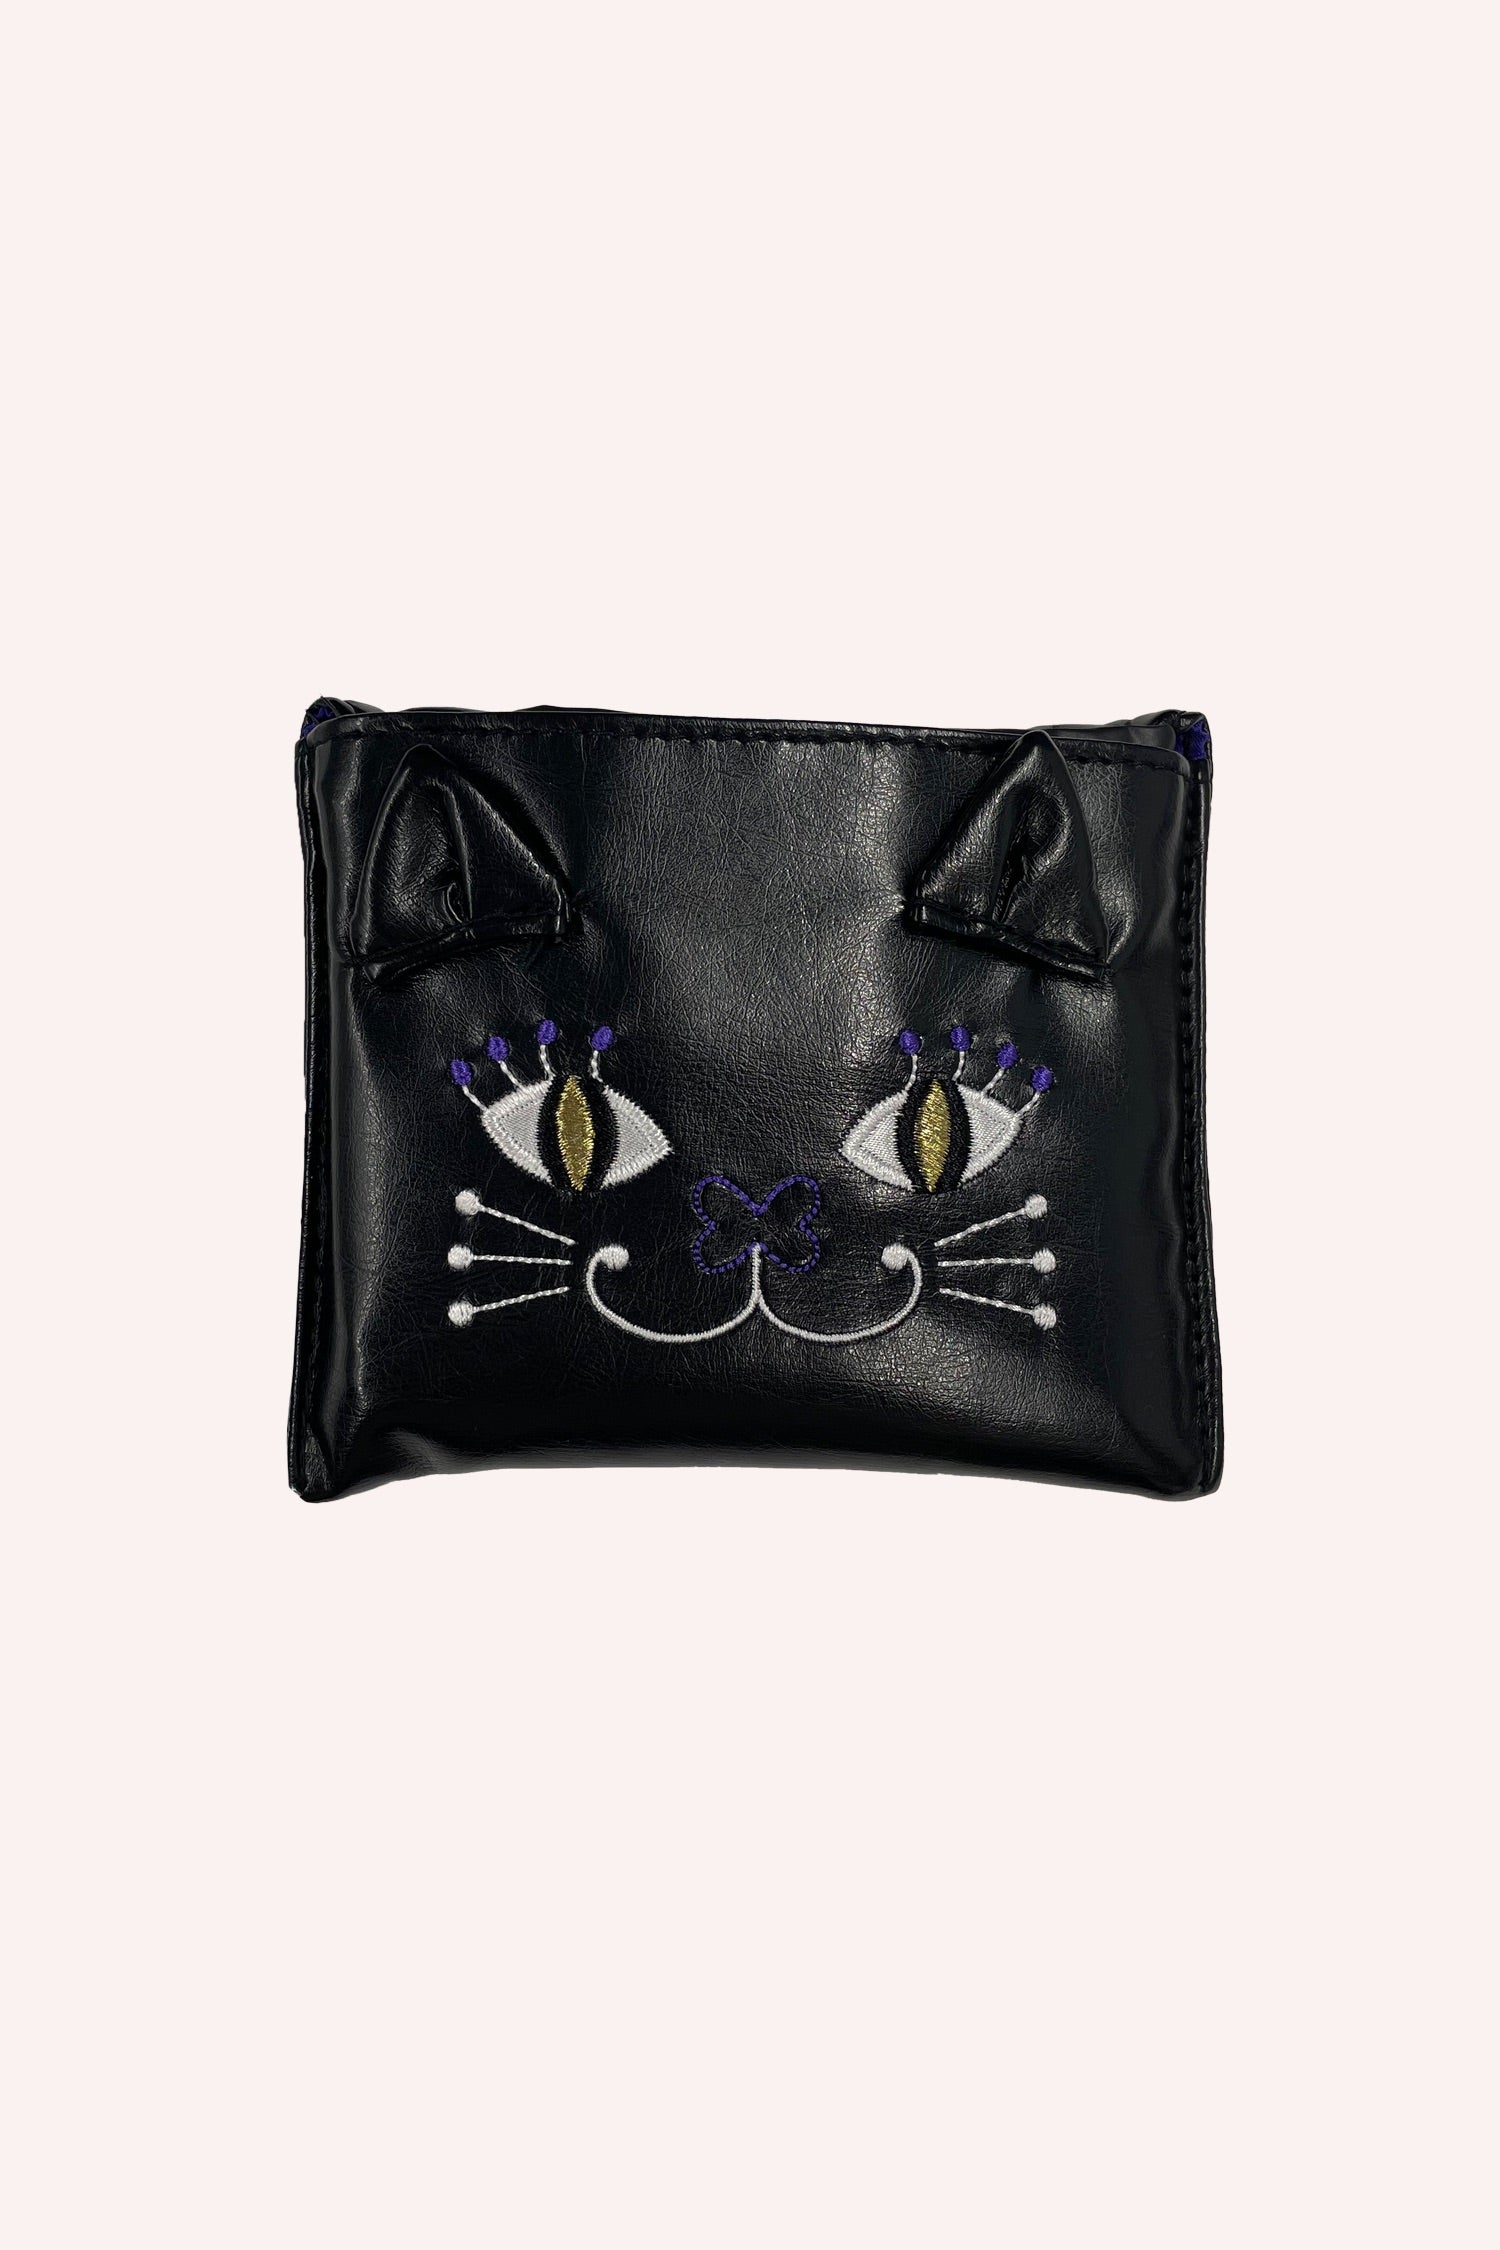 Cat Tote Bag, black, stylized cat on front in white seams, purple eyes, blue dots on eyelashes